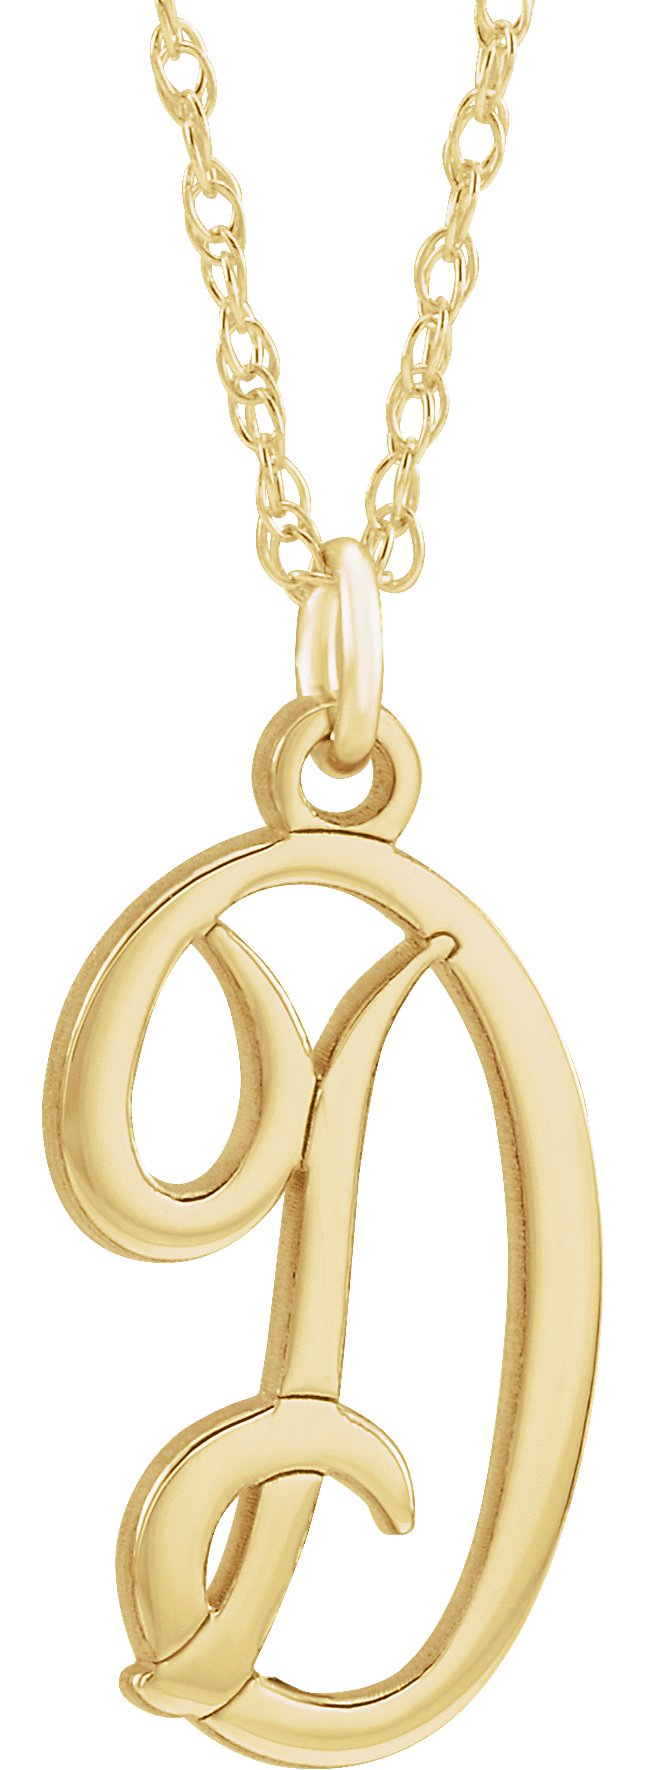 14K Yellow Gold-Plated Sterling Silver Script Initial D 16-18" Necklace